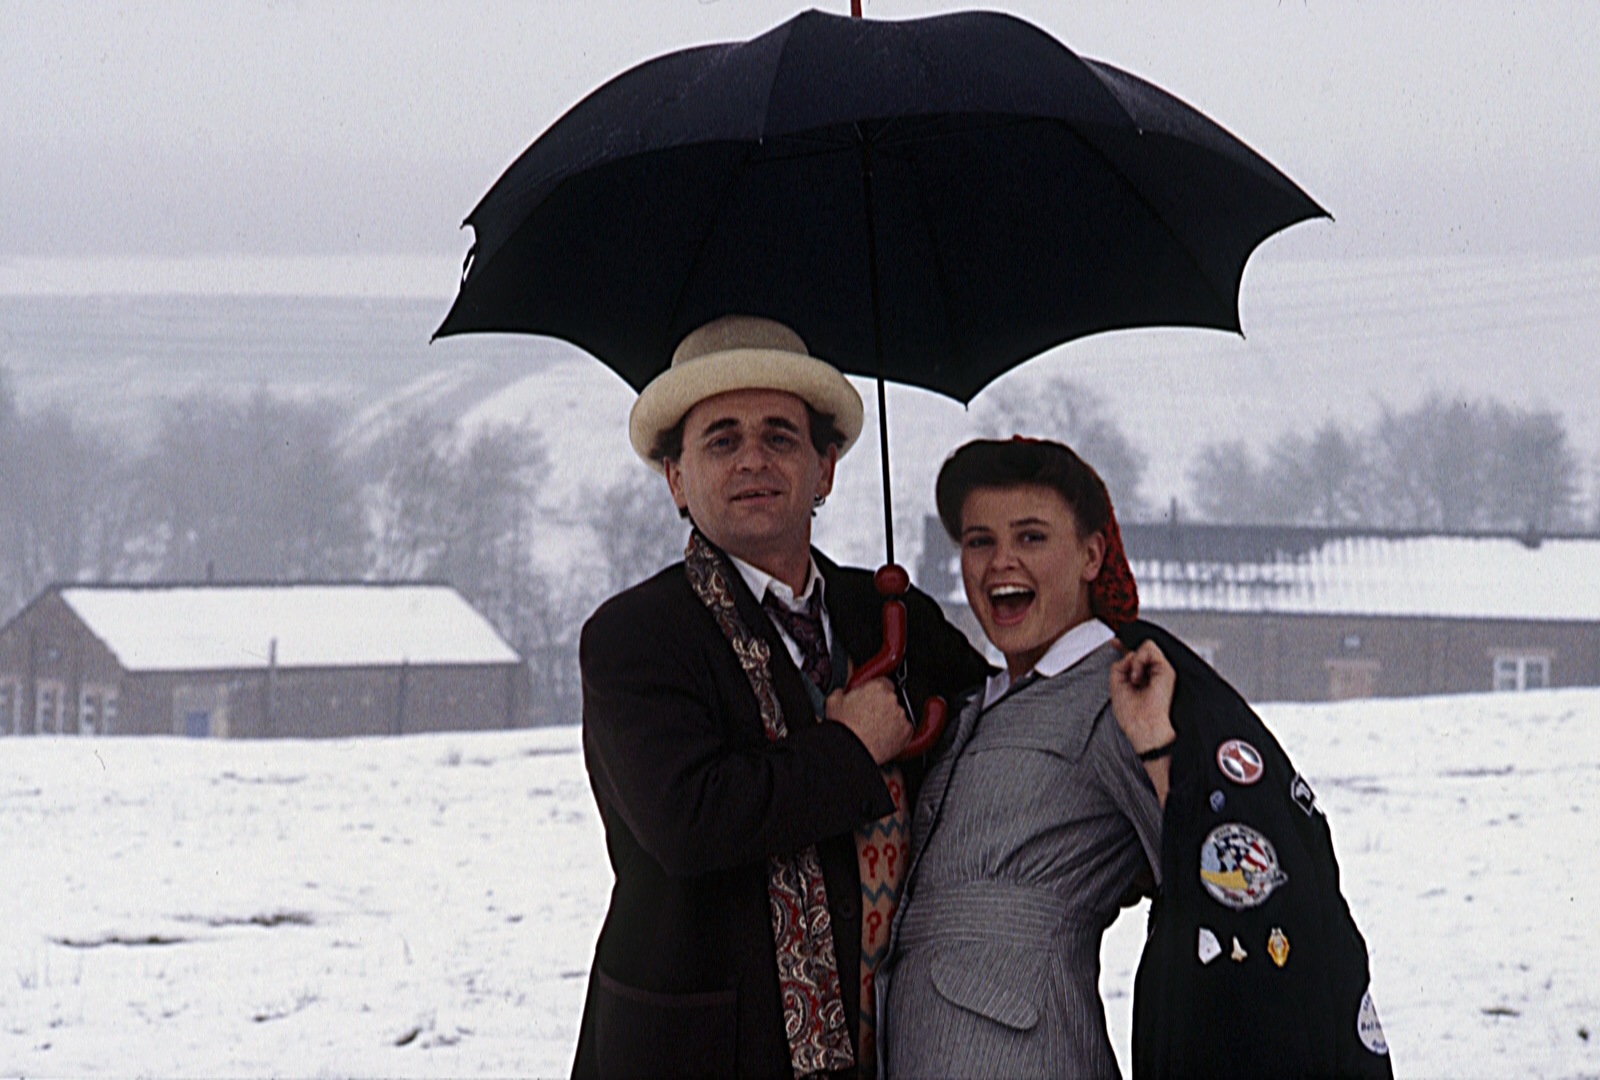 Sophie Aldred as Ace and Sylvester McCoy as the Seventh Doctor standing under an umbrella